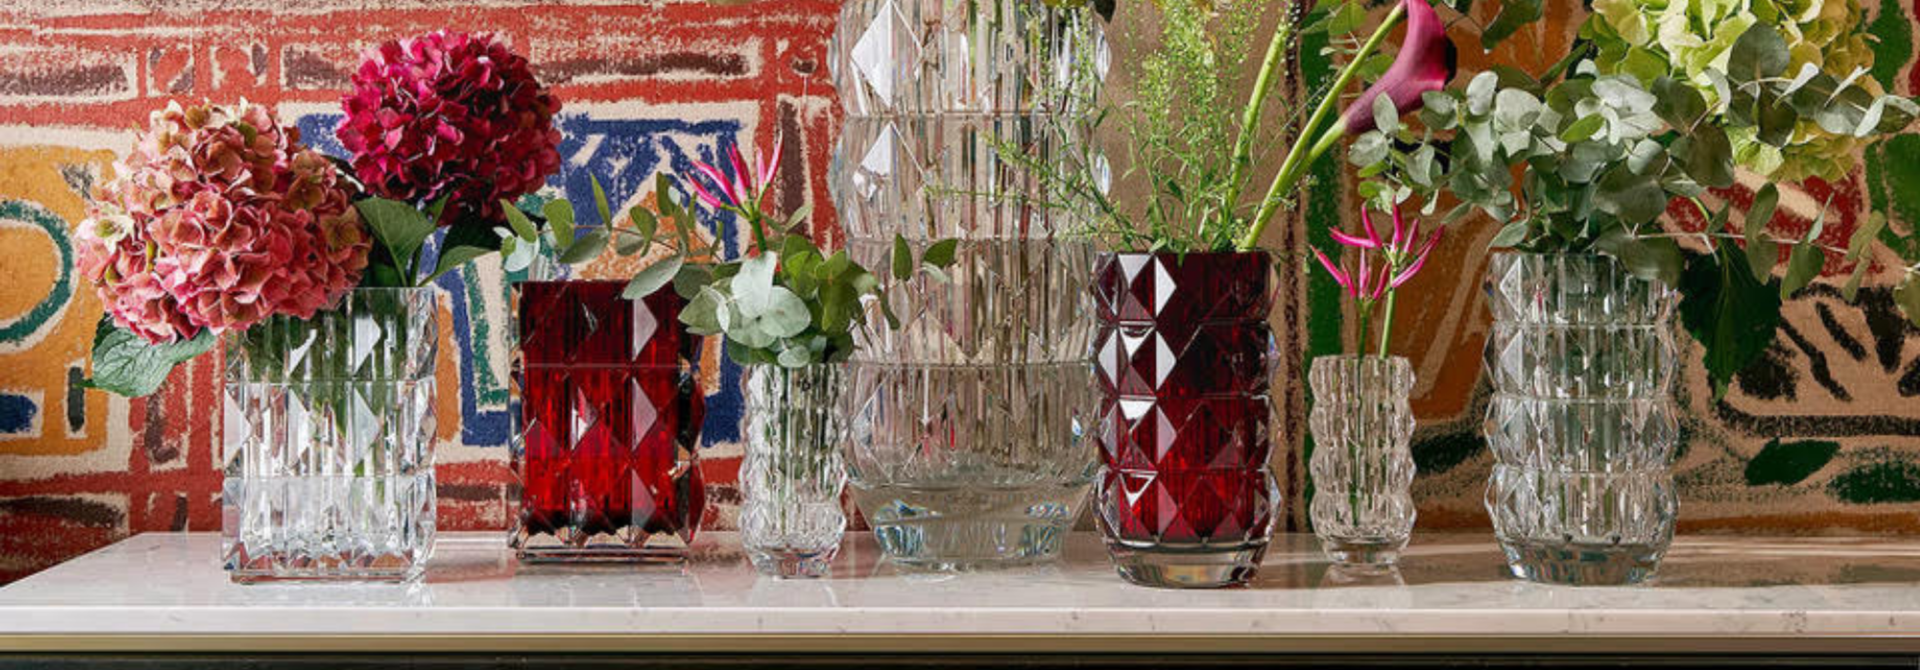 How to choose the right vase for your flowers?